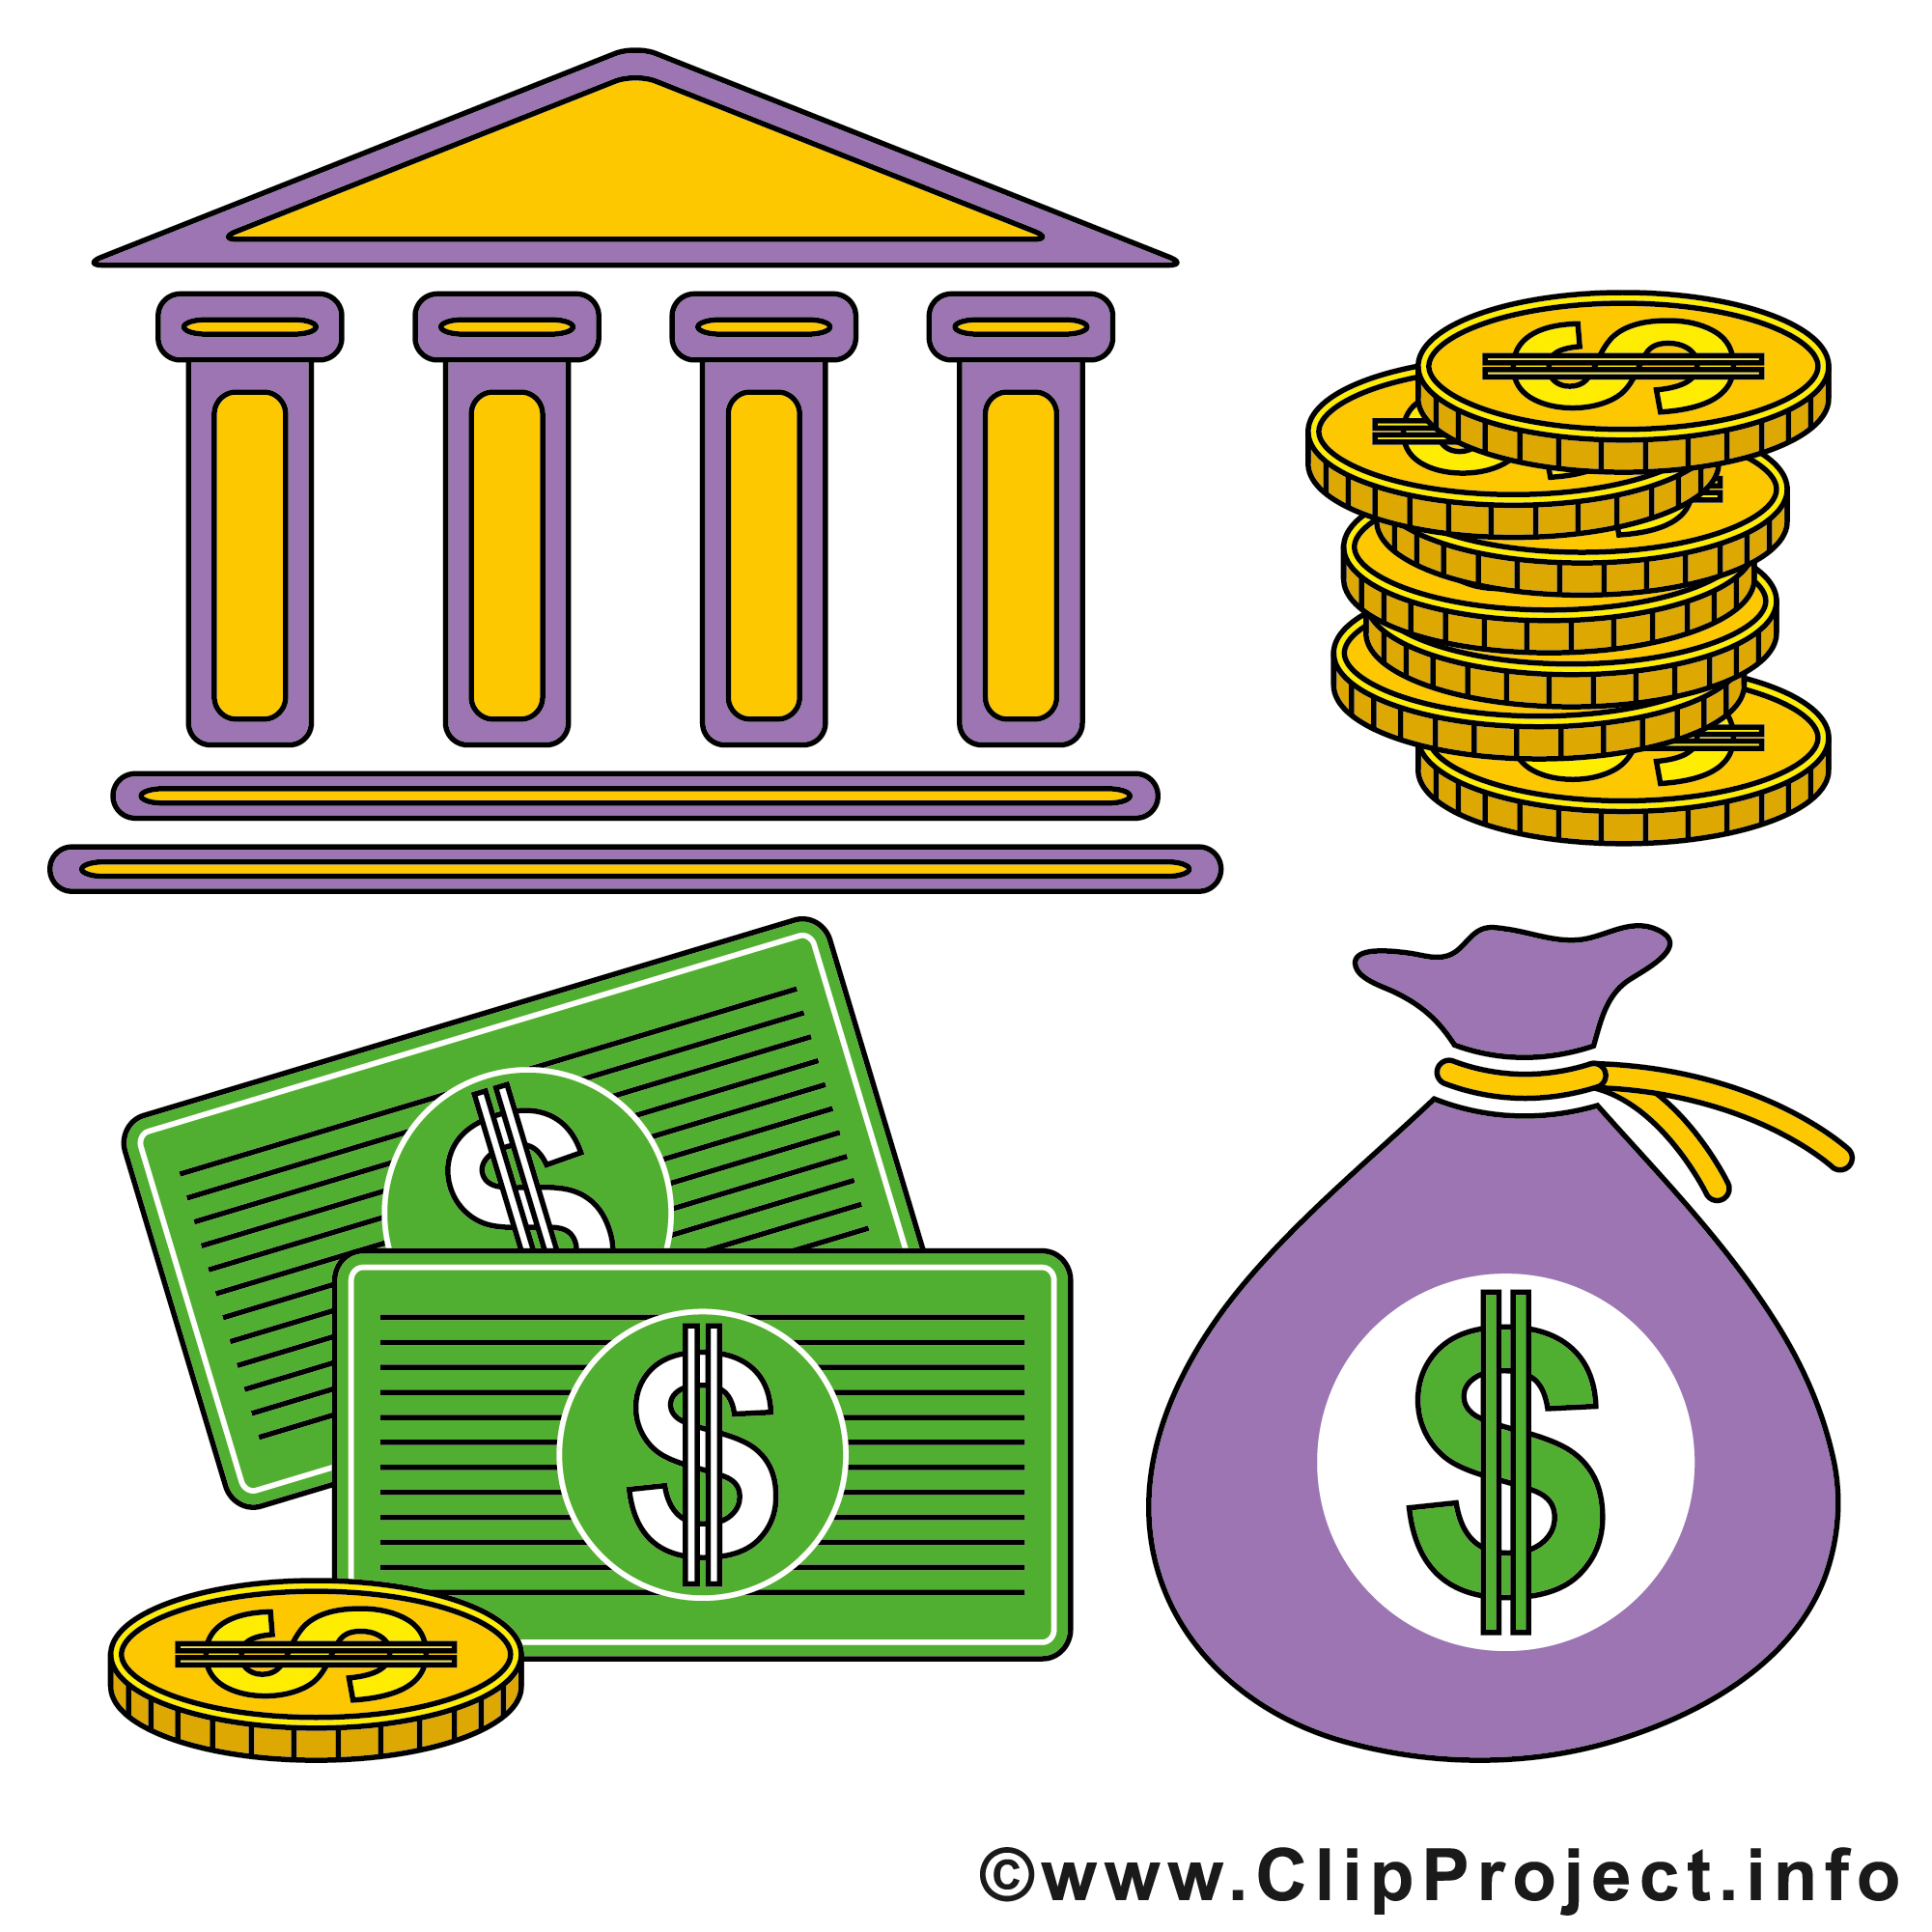 clipart of a bank - photo #19